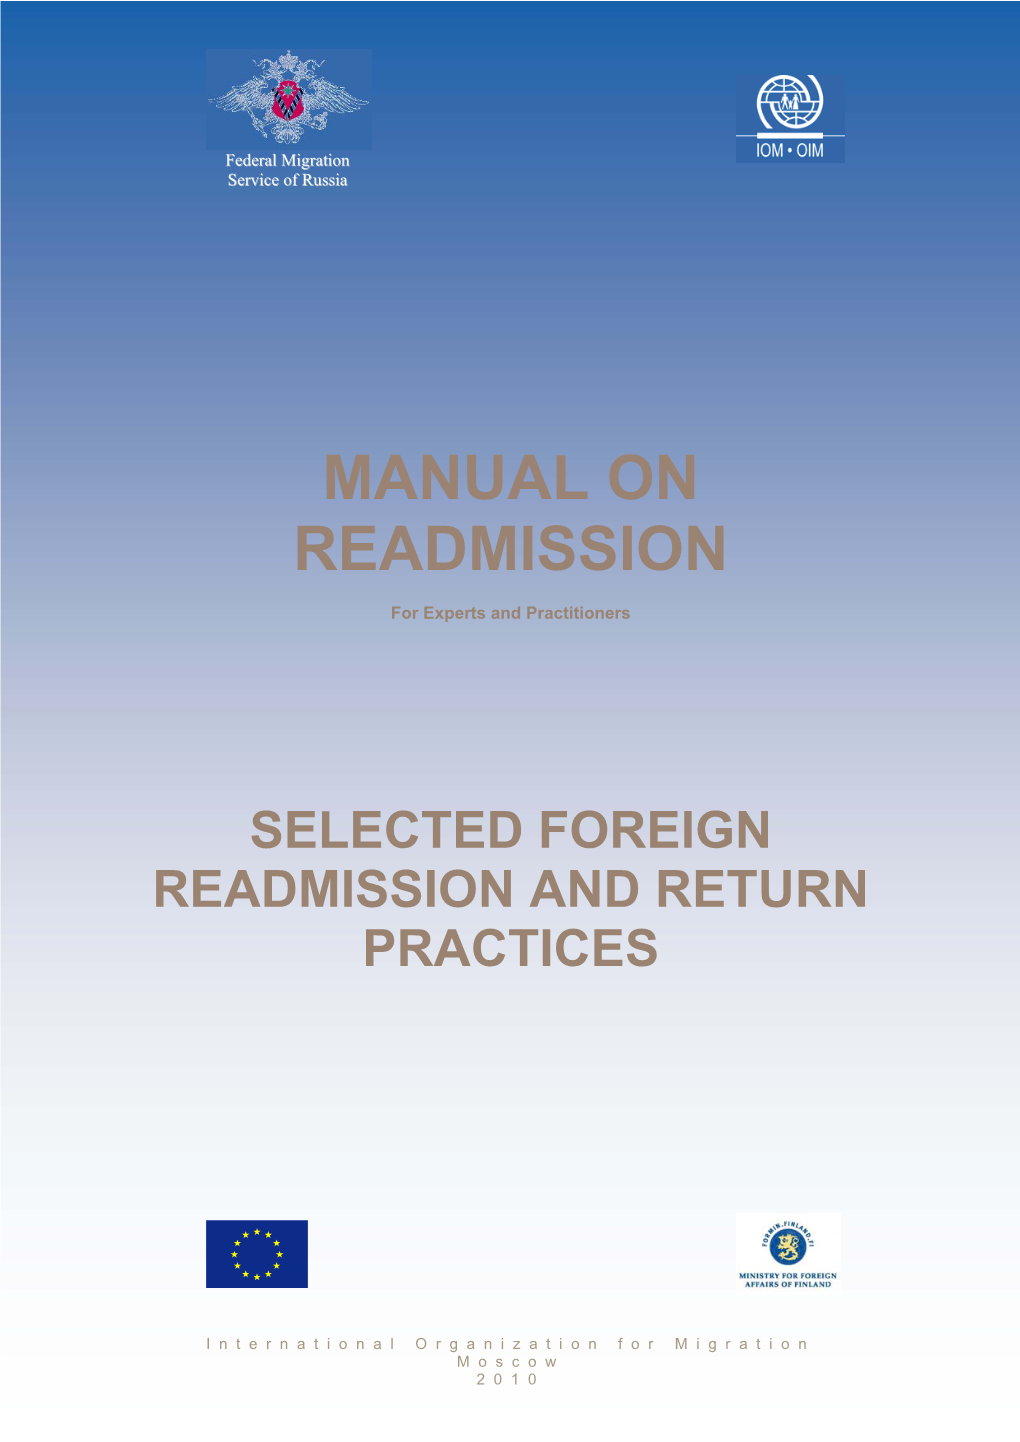 Foreign Practices in Readmission and Return